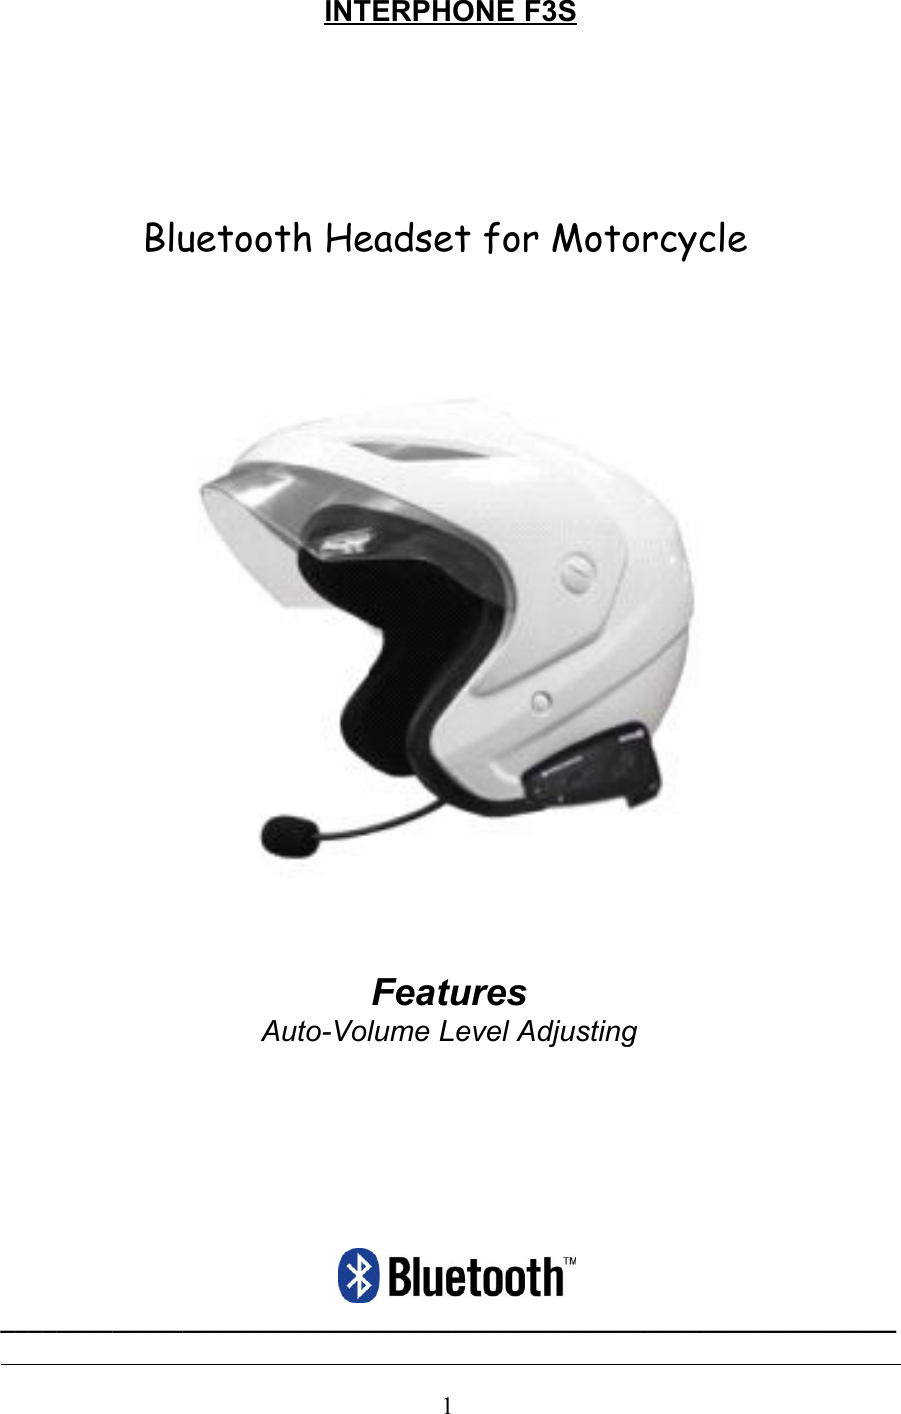 INTERPHONE F3SBluetooth Headset for Motorcycle FeaturesAuto-Volume Level Adjusting________________________________________________________________                                                                    1 